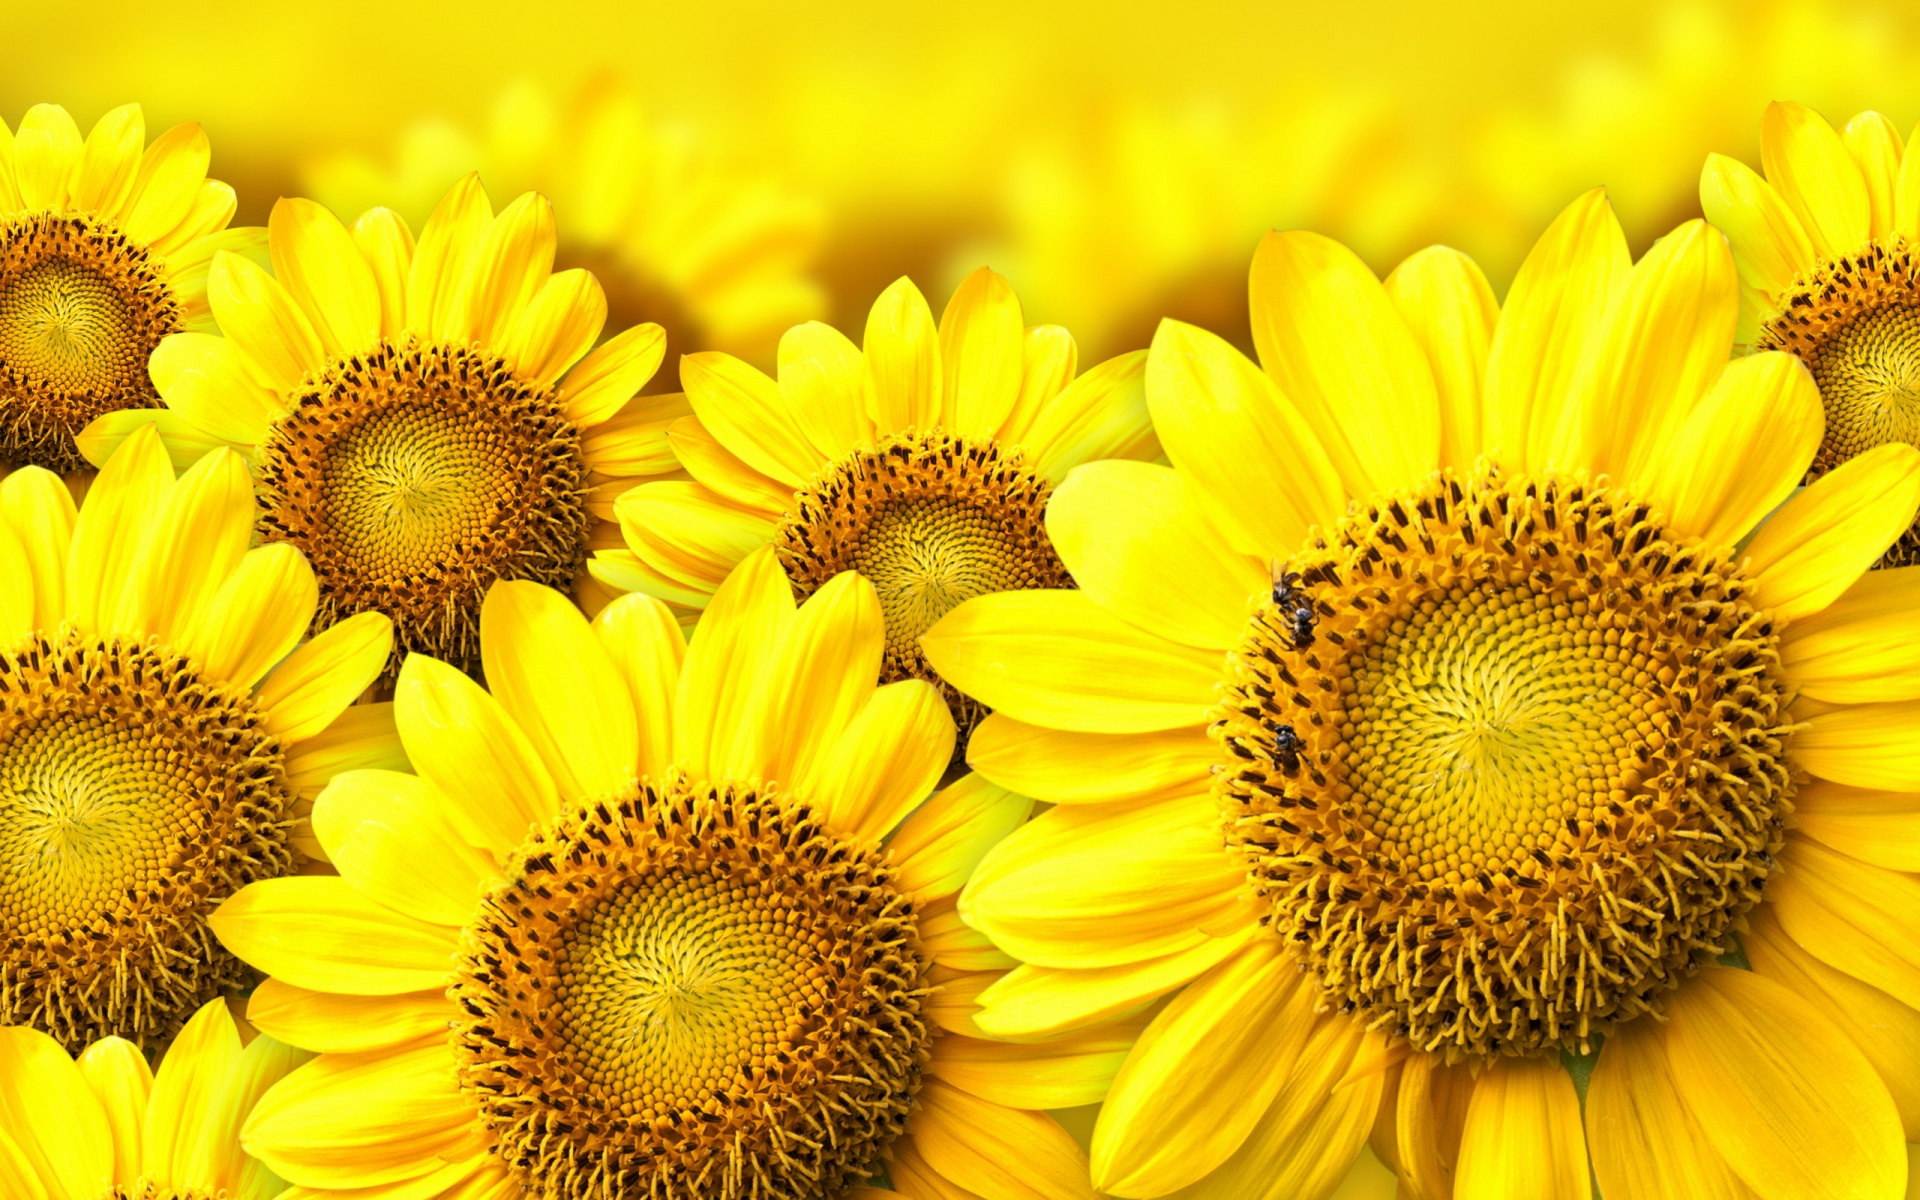 Yellow Flowers Wallpaper High Definition Quality Widescreen